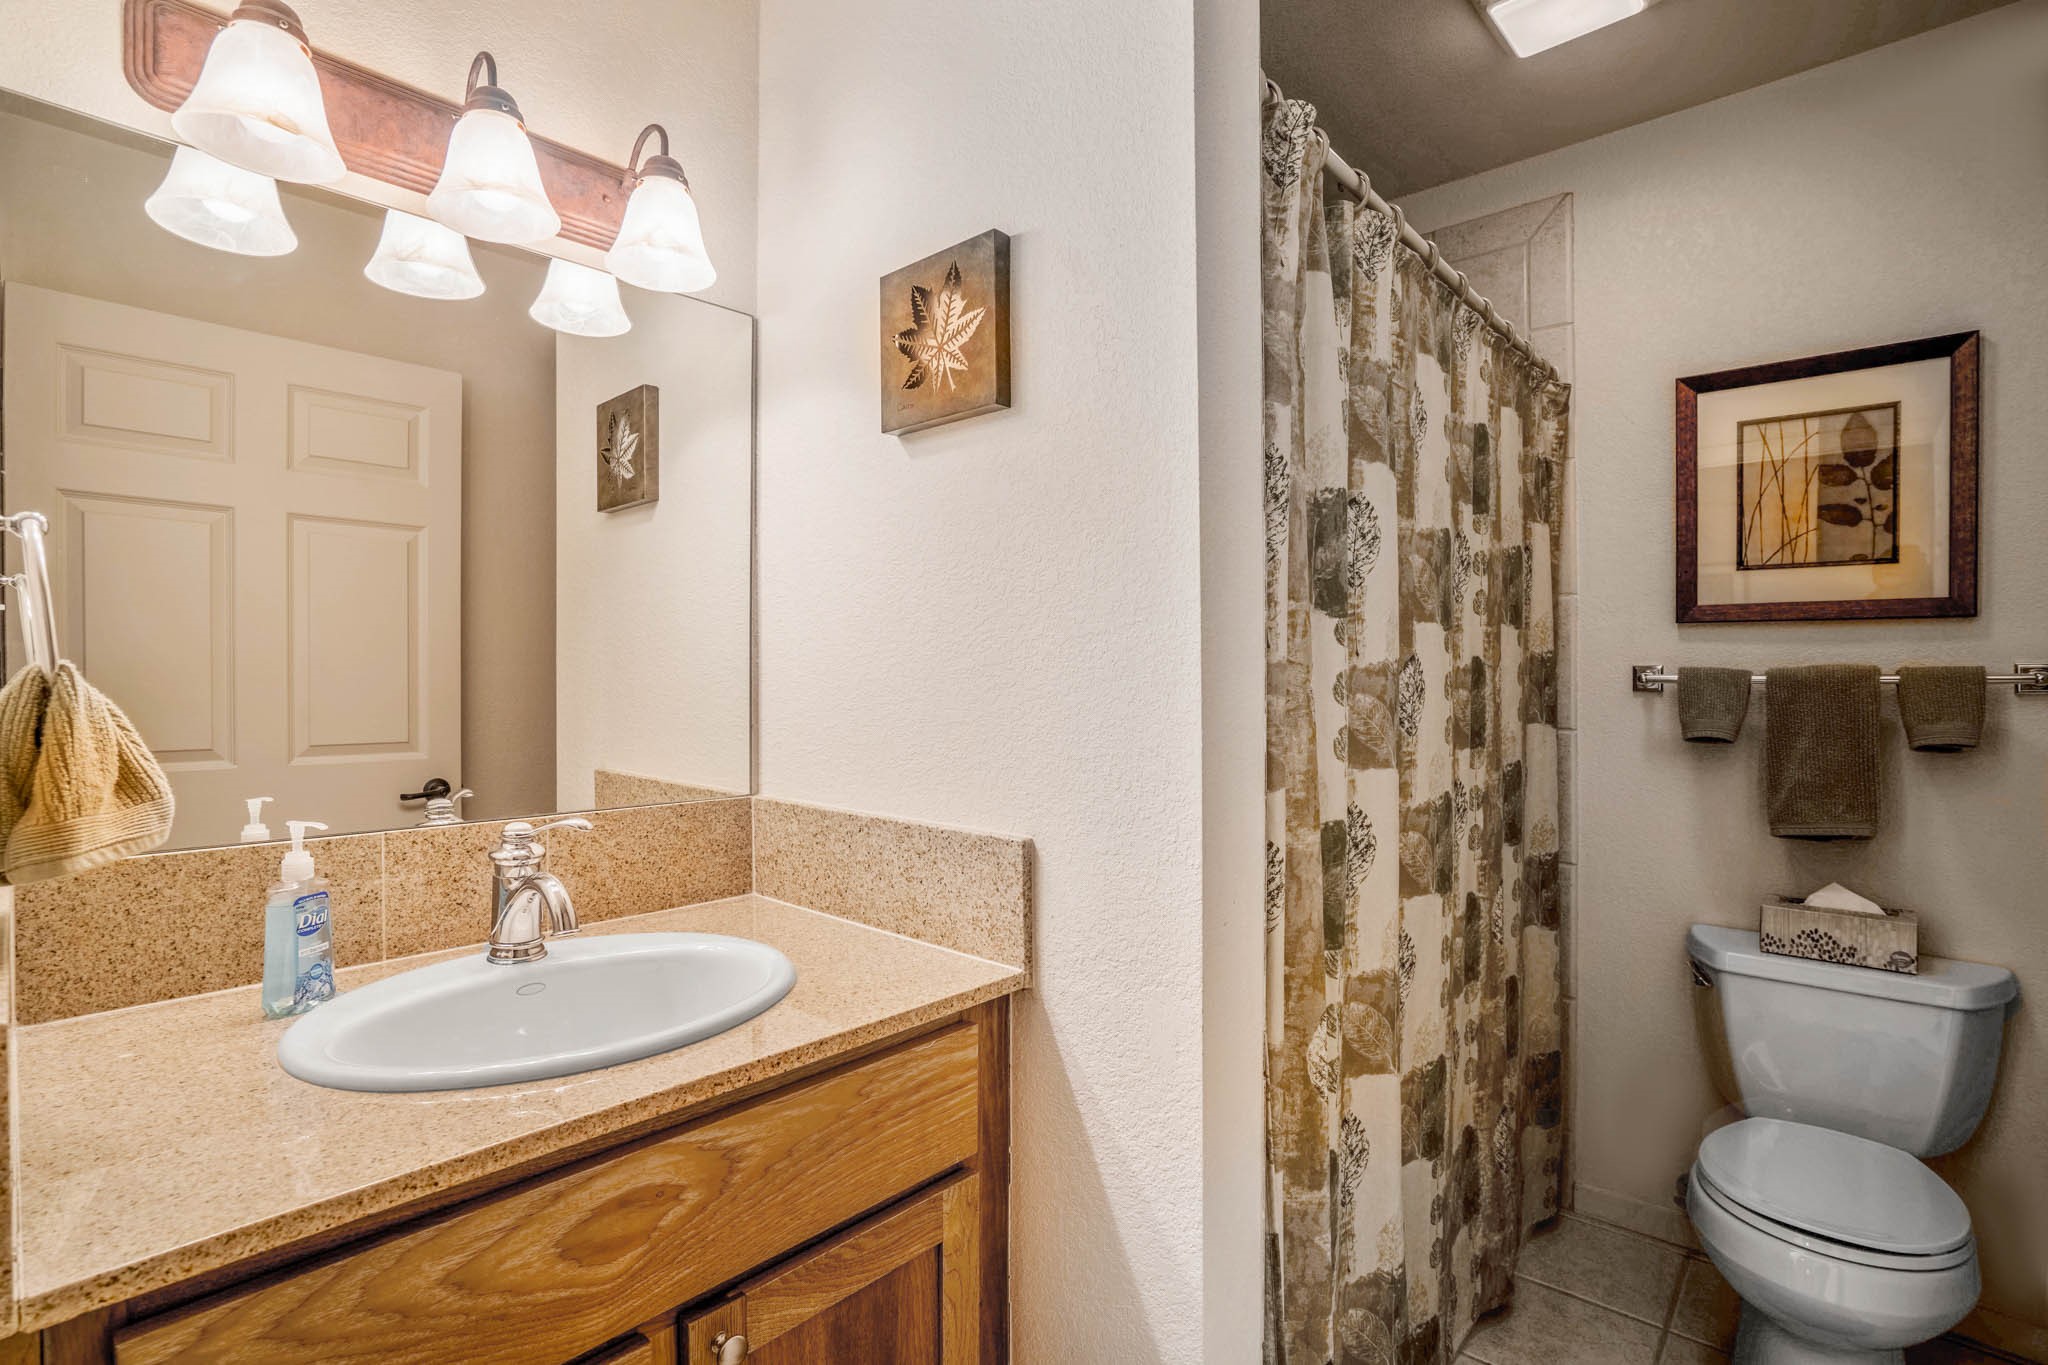 601 W San Mateo 76, Santa Fe, New Mexico 87505, 2 Bedrooms Bedrooms, ,2 BathroomsBathrooms,Residential,For Sale,601 W San Mateo 76,202234476